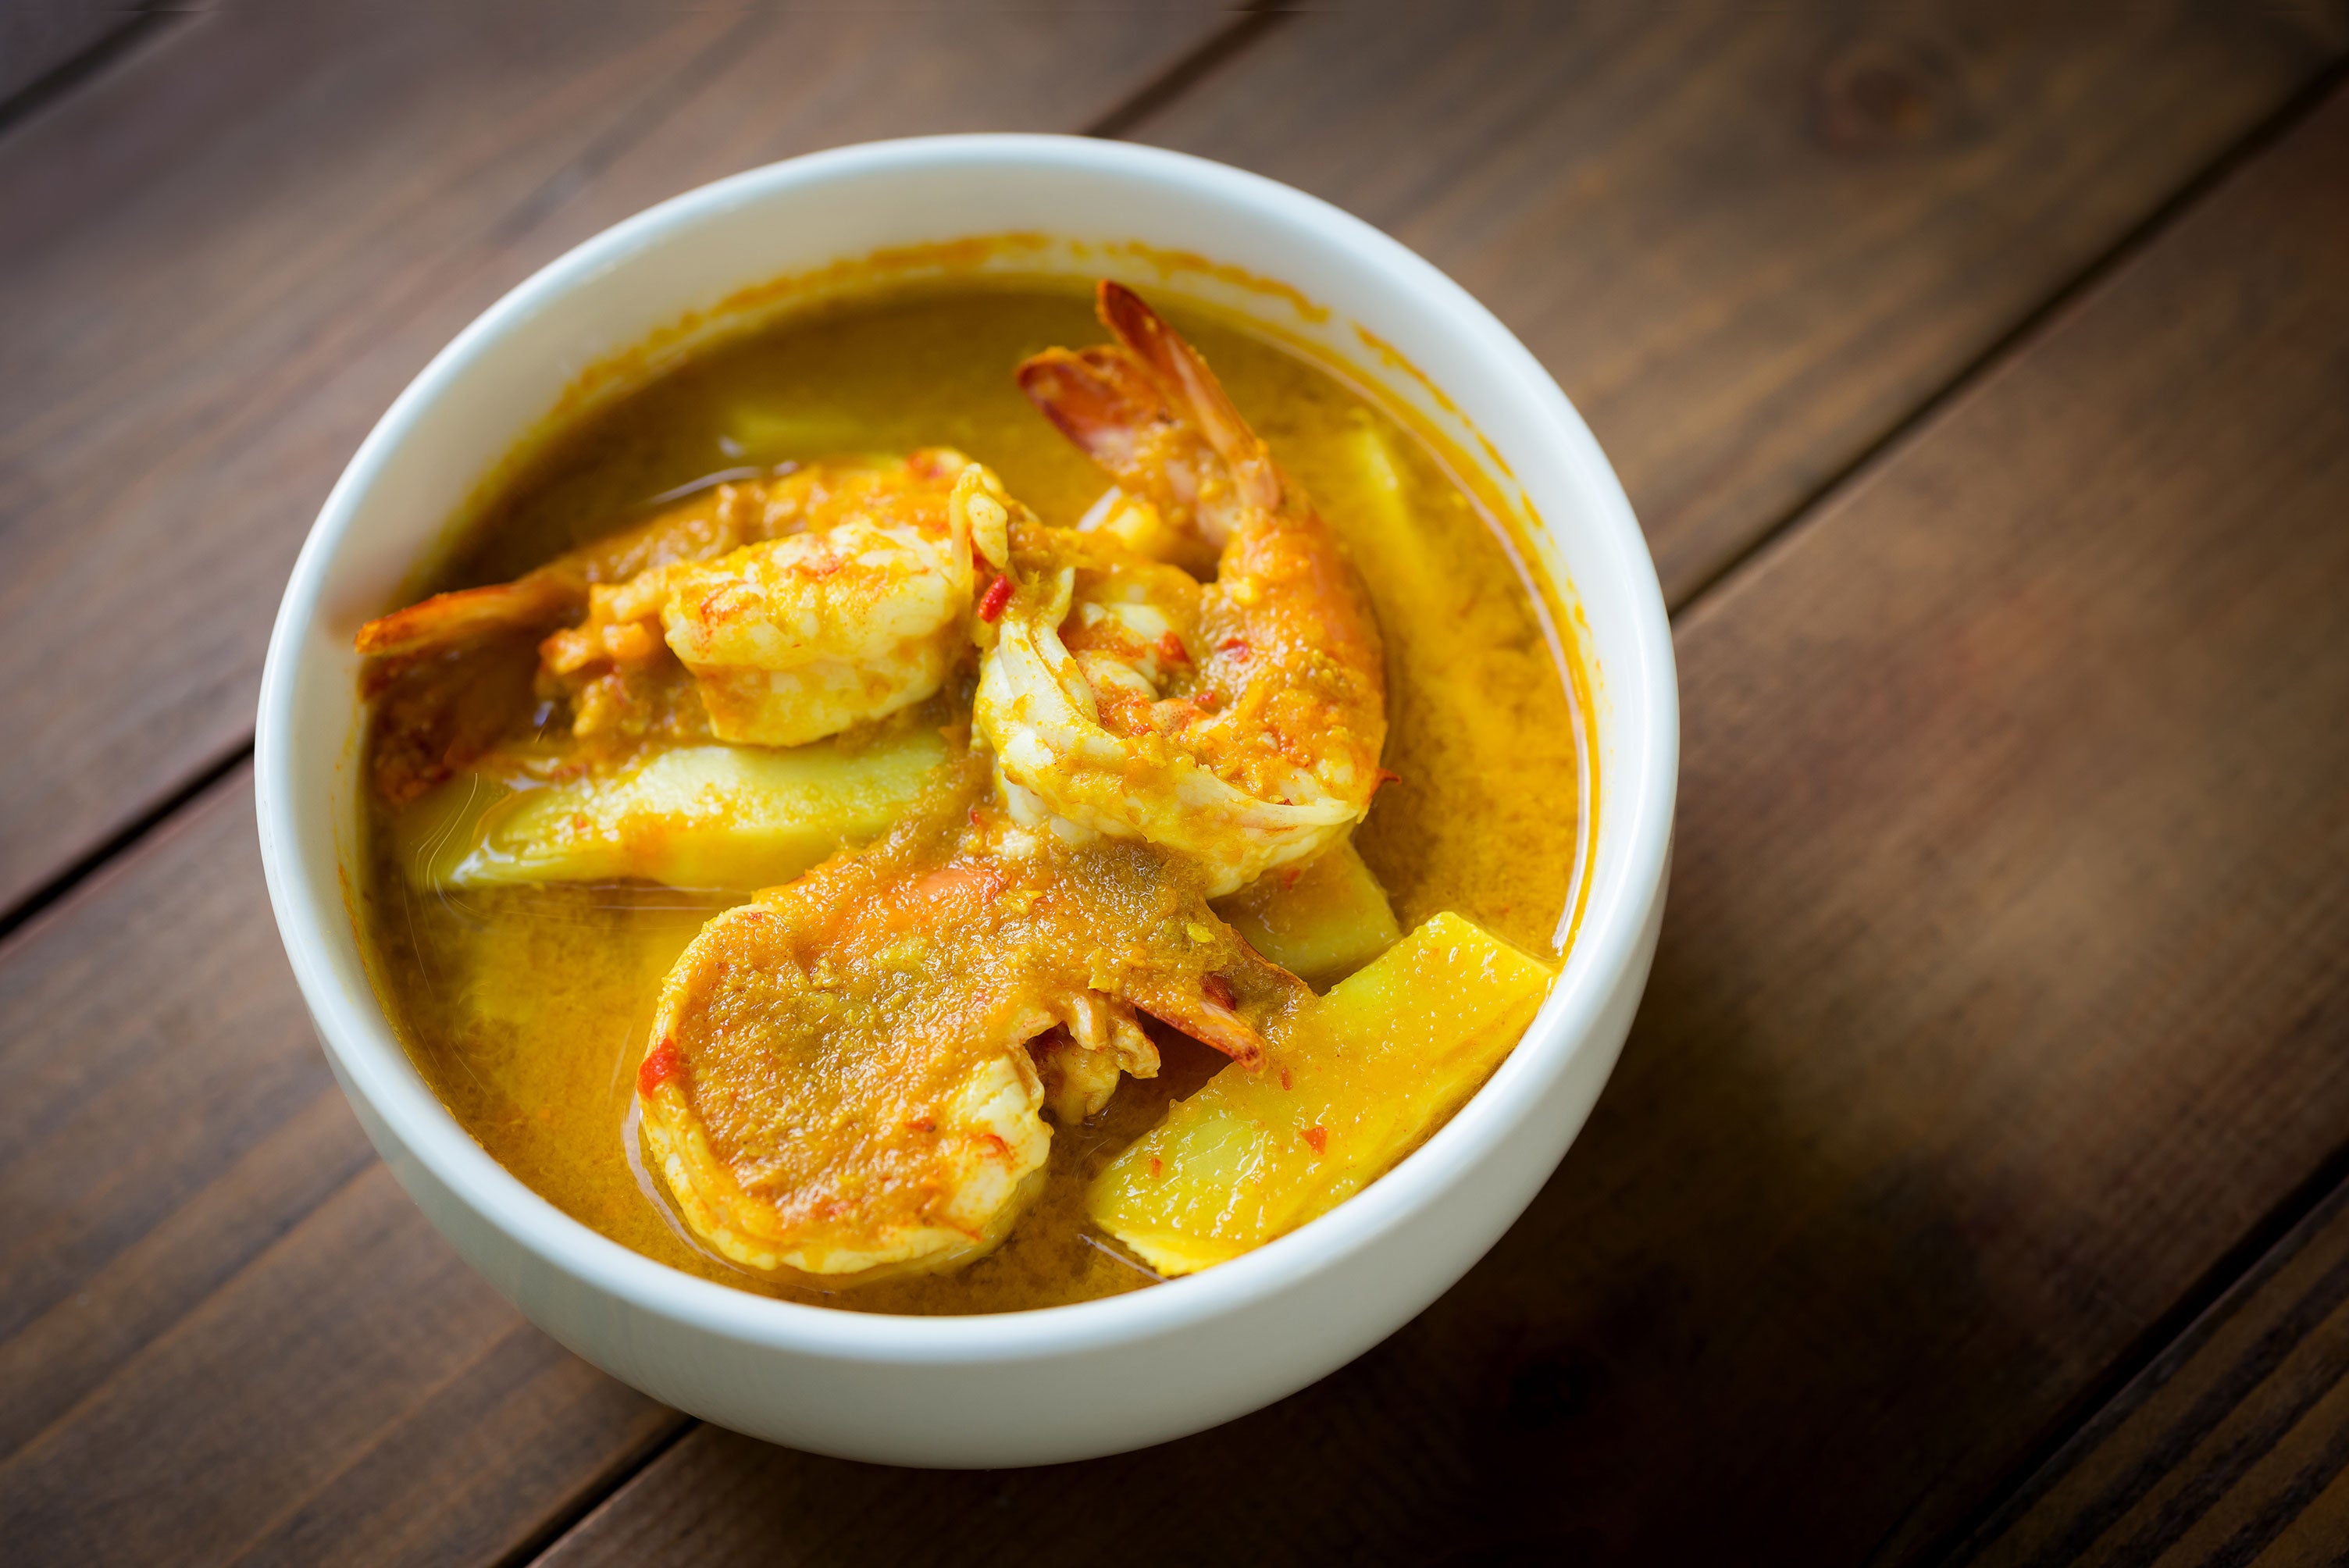 Coconut Curry Shrimp features shrimp cooked in a creamy coconut curry sauce that is flavored with curry powder and other spices.